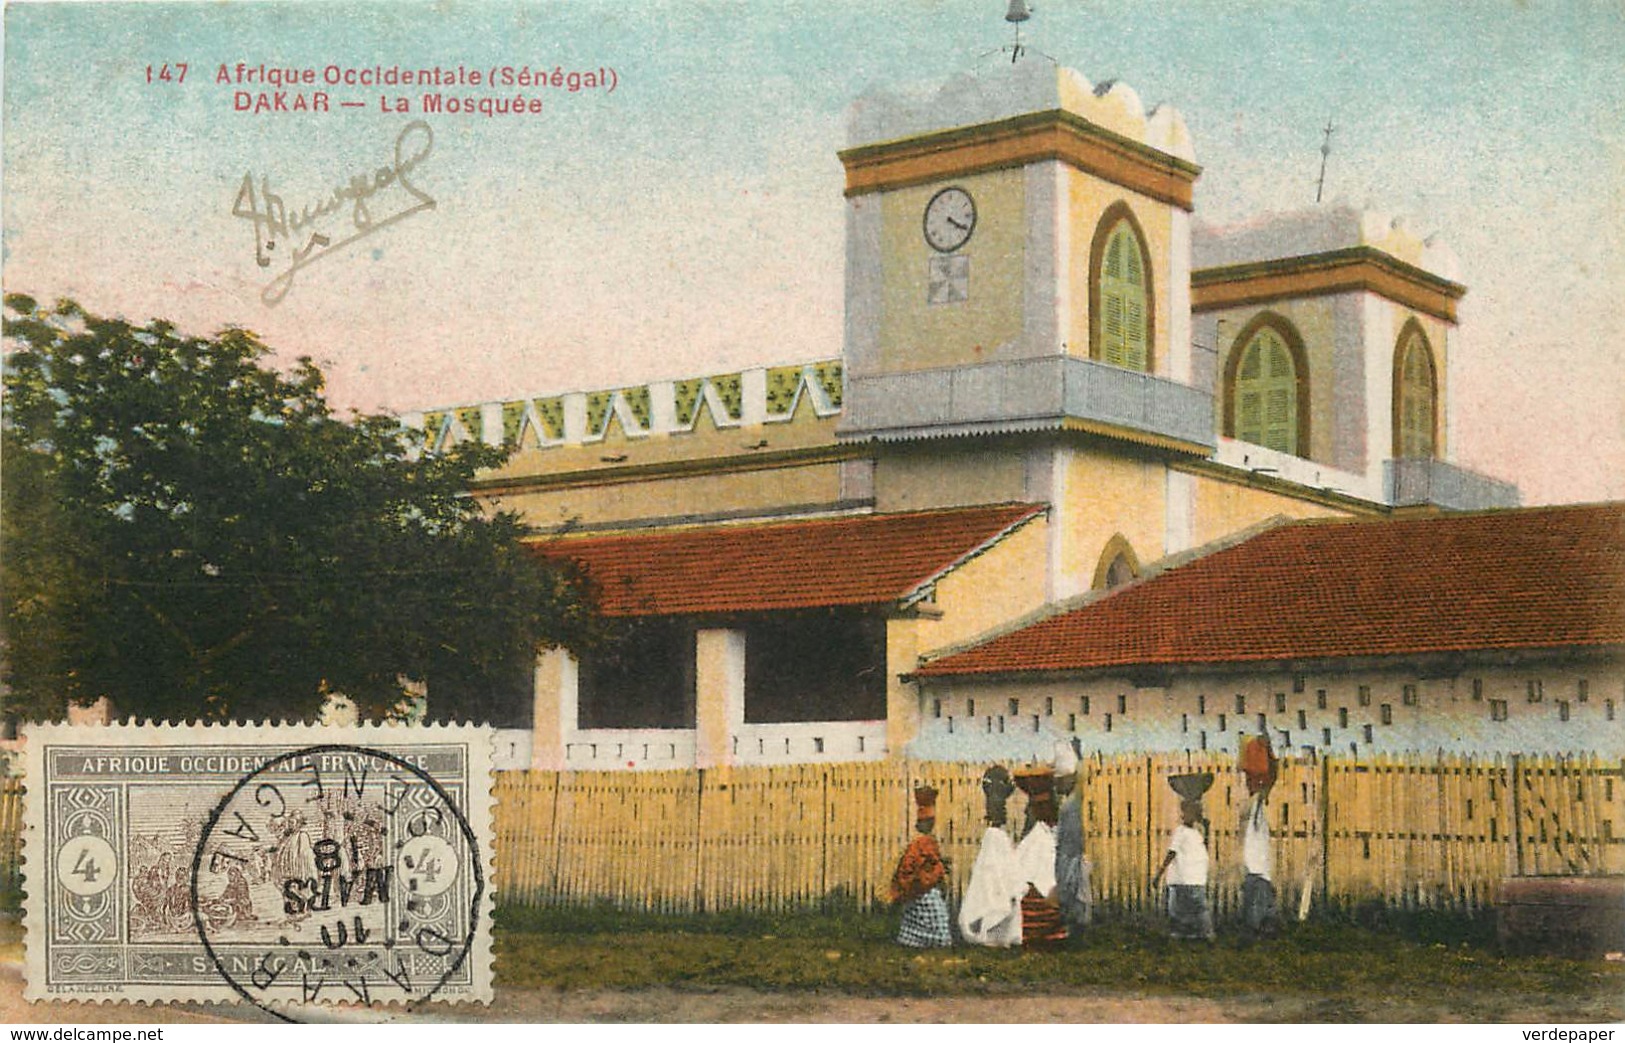 #147. Senegal Dakar; La Mosquee (Mosque Postcard... Scott #81 Stamp Tied To Front...Value $61.50 Catalog On Cover. - Senegal